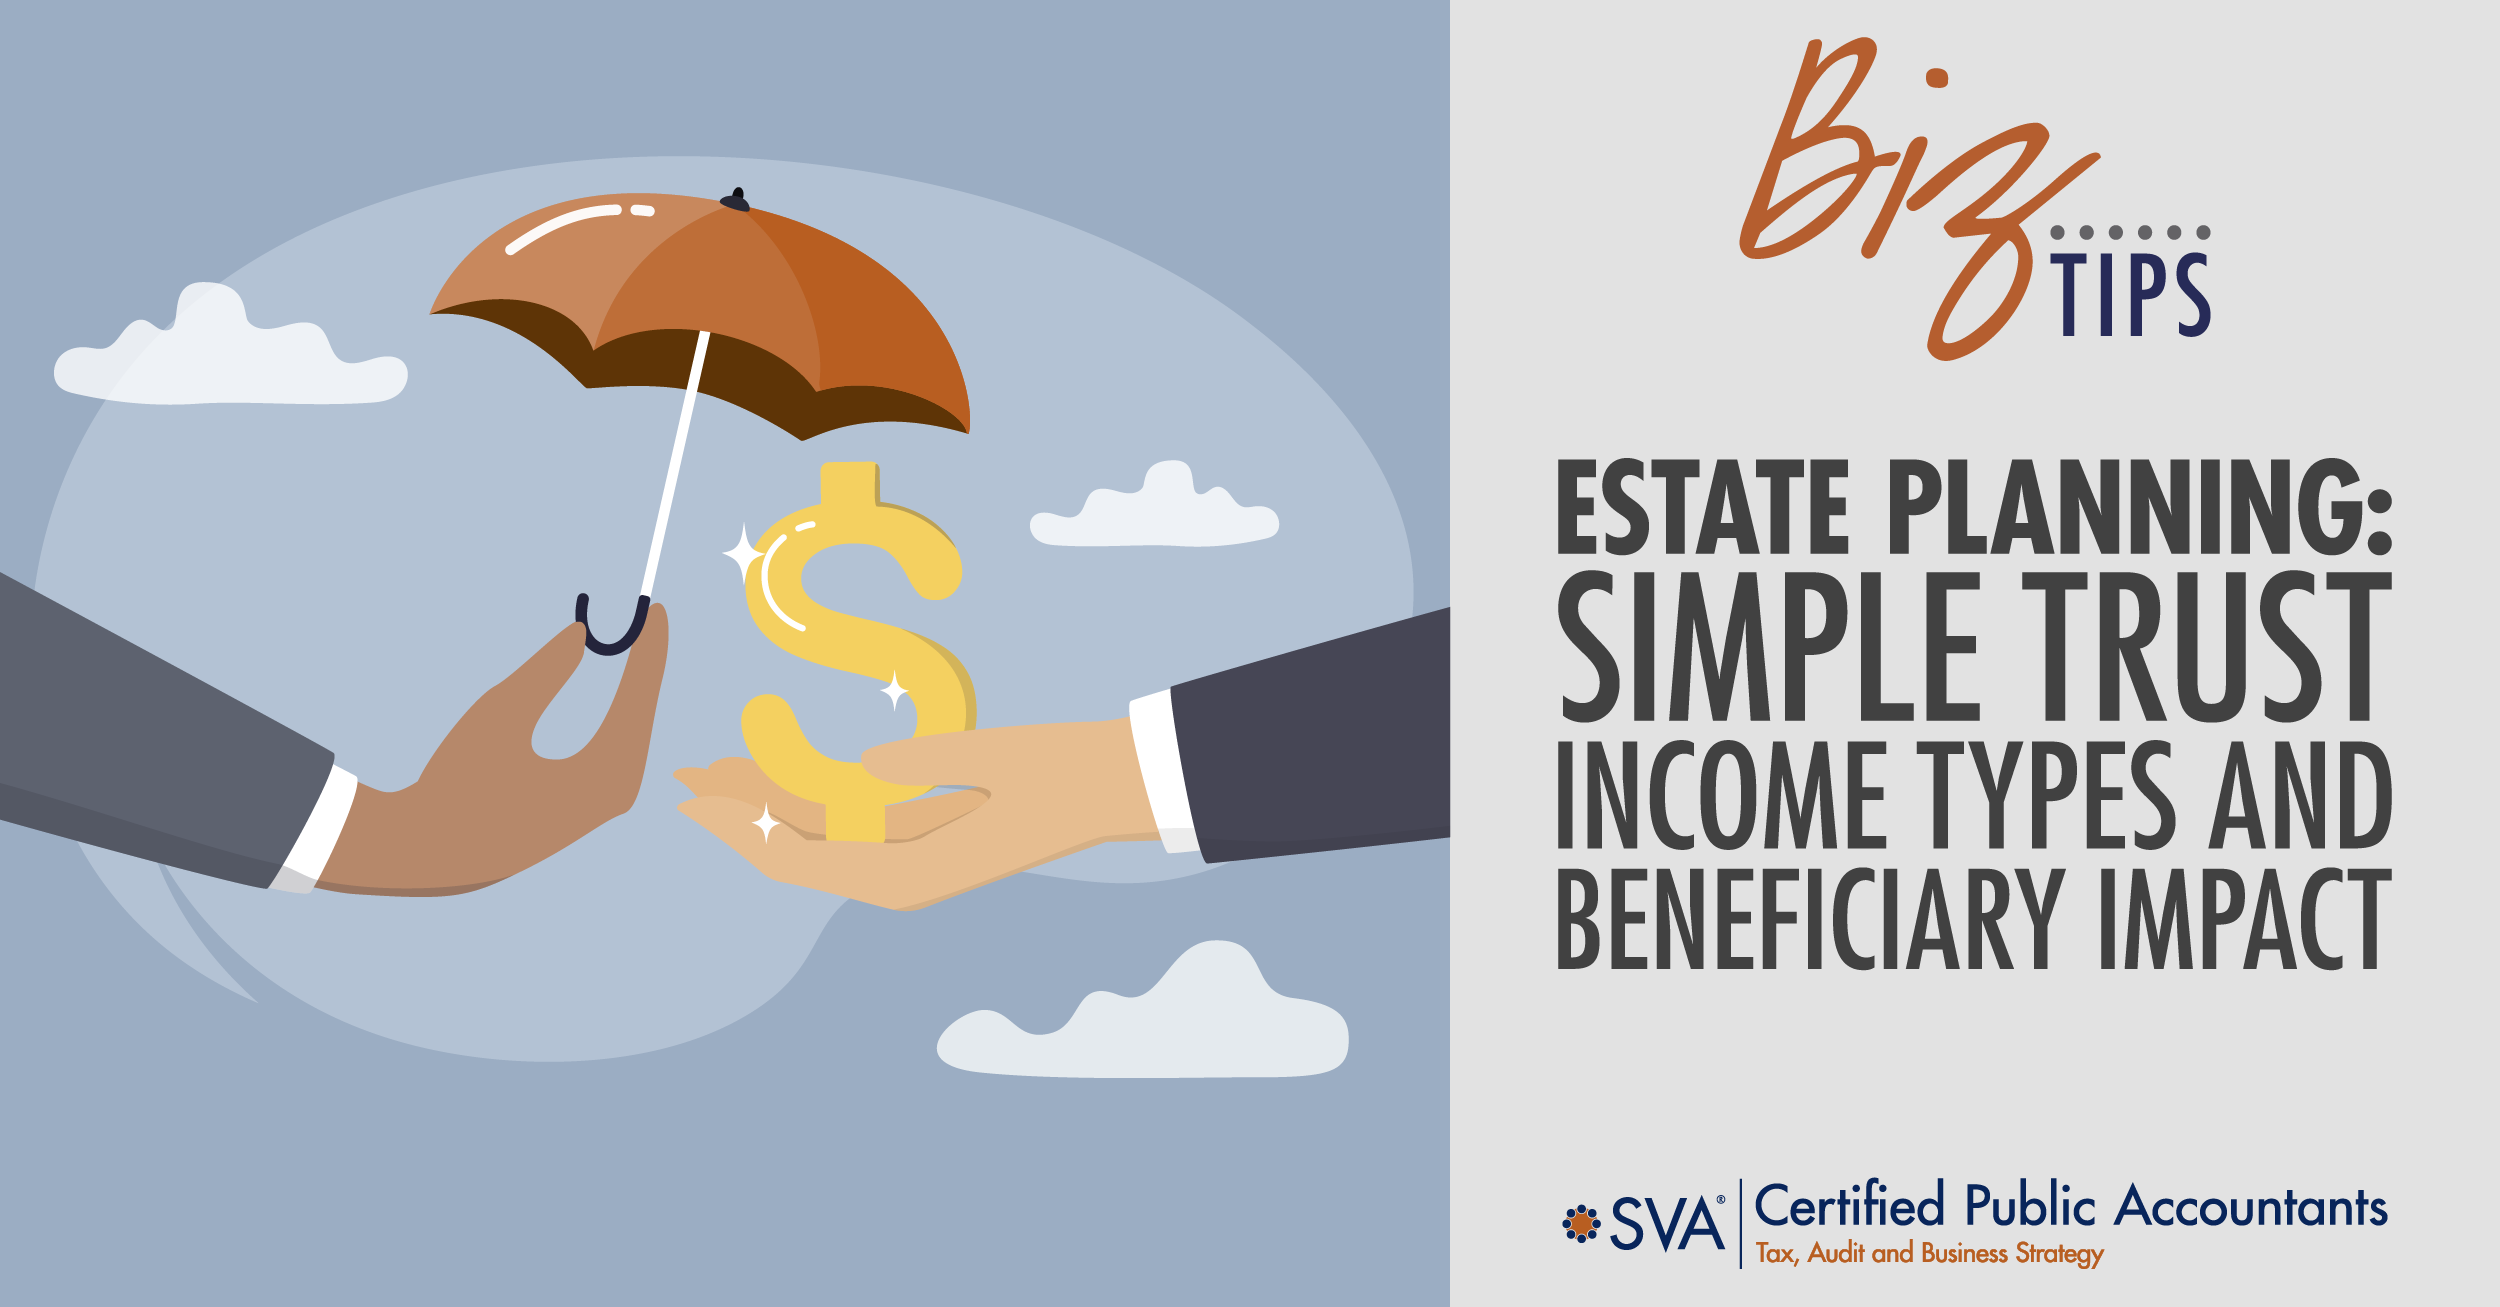 Estate Planning: Simple Trust Income Types and Beneficiary Impact